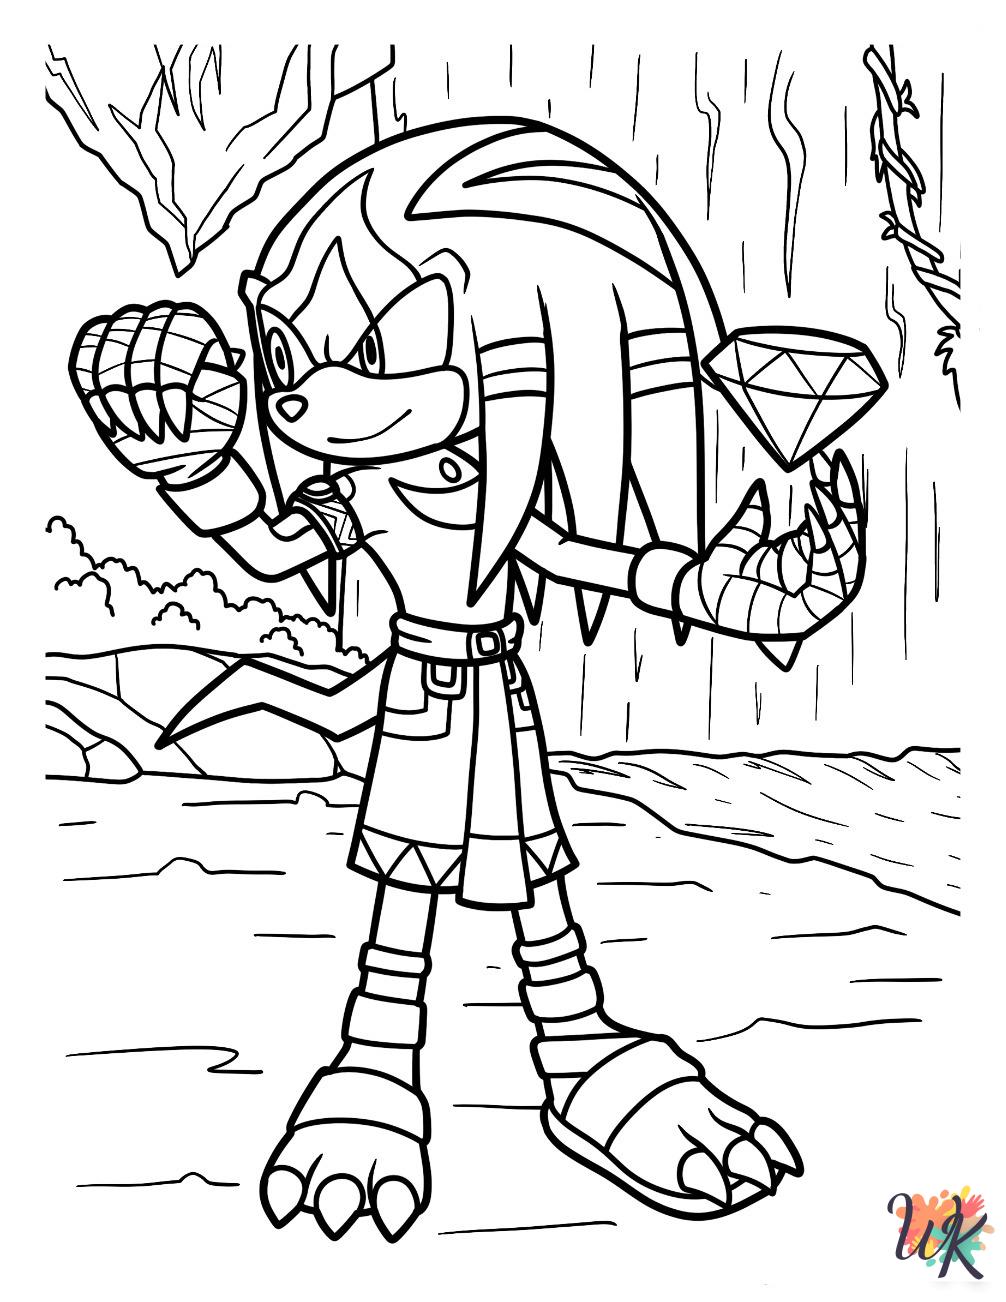 Knuckles coloring pages for preschoolers